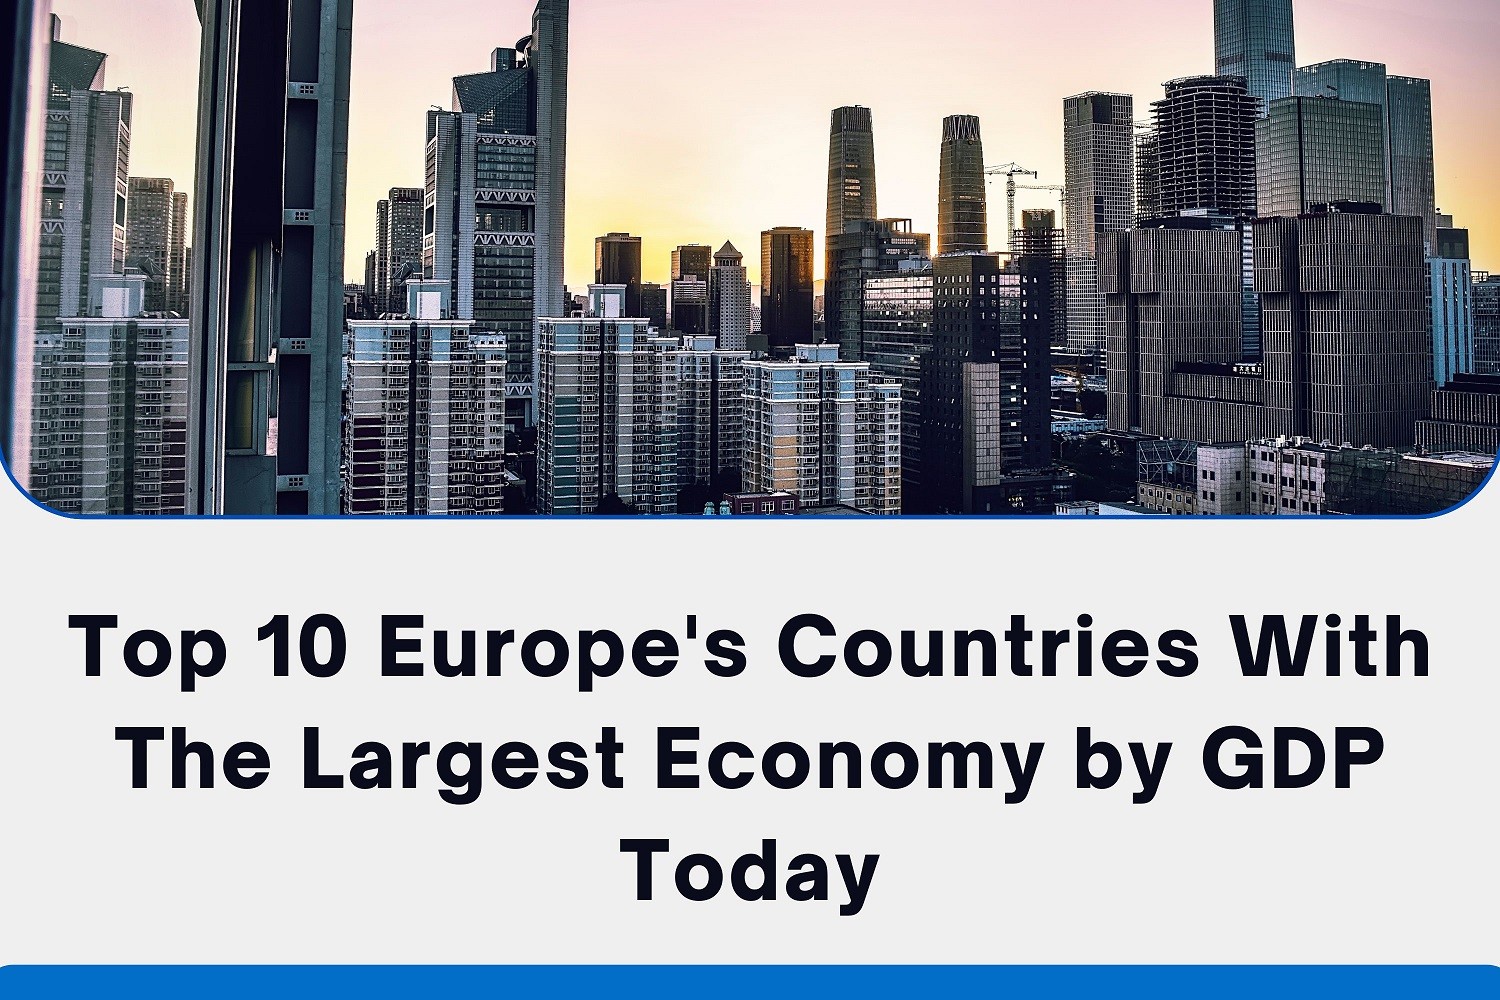 Top 10 European Countries with the Largest Economy by GDP Today ...